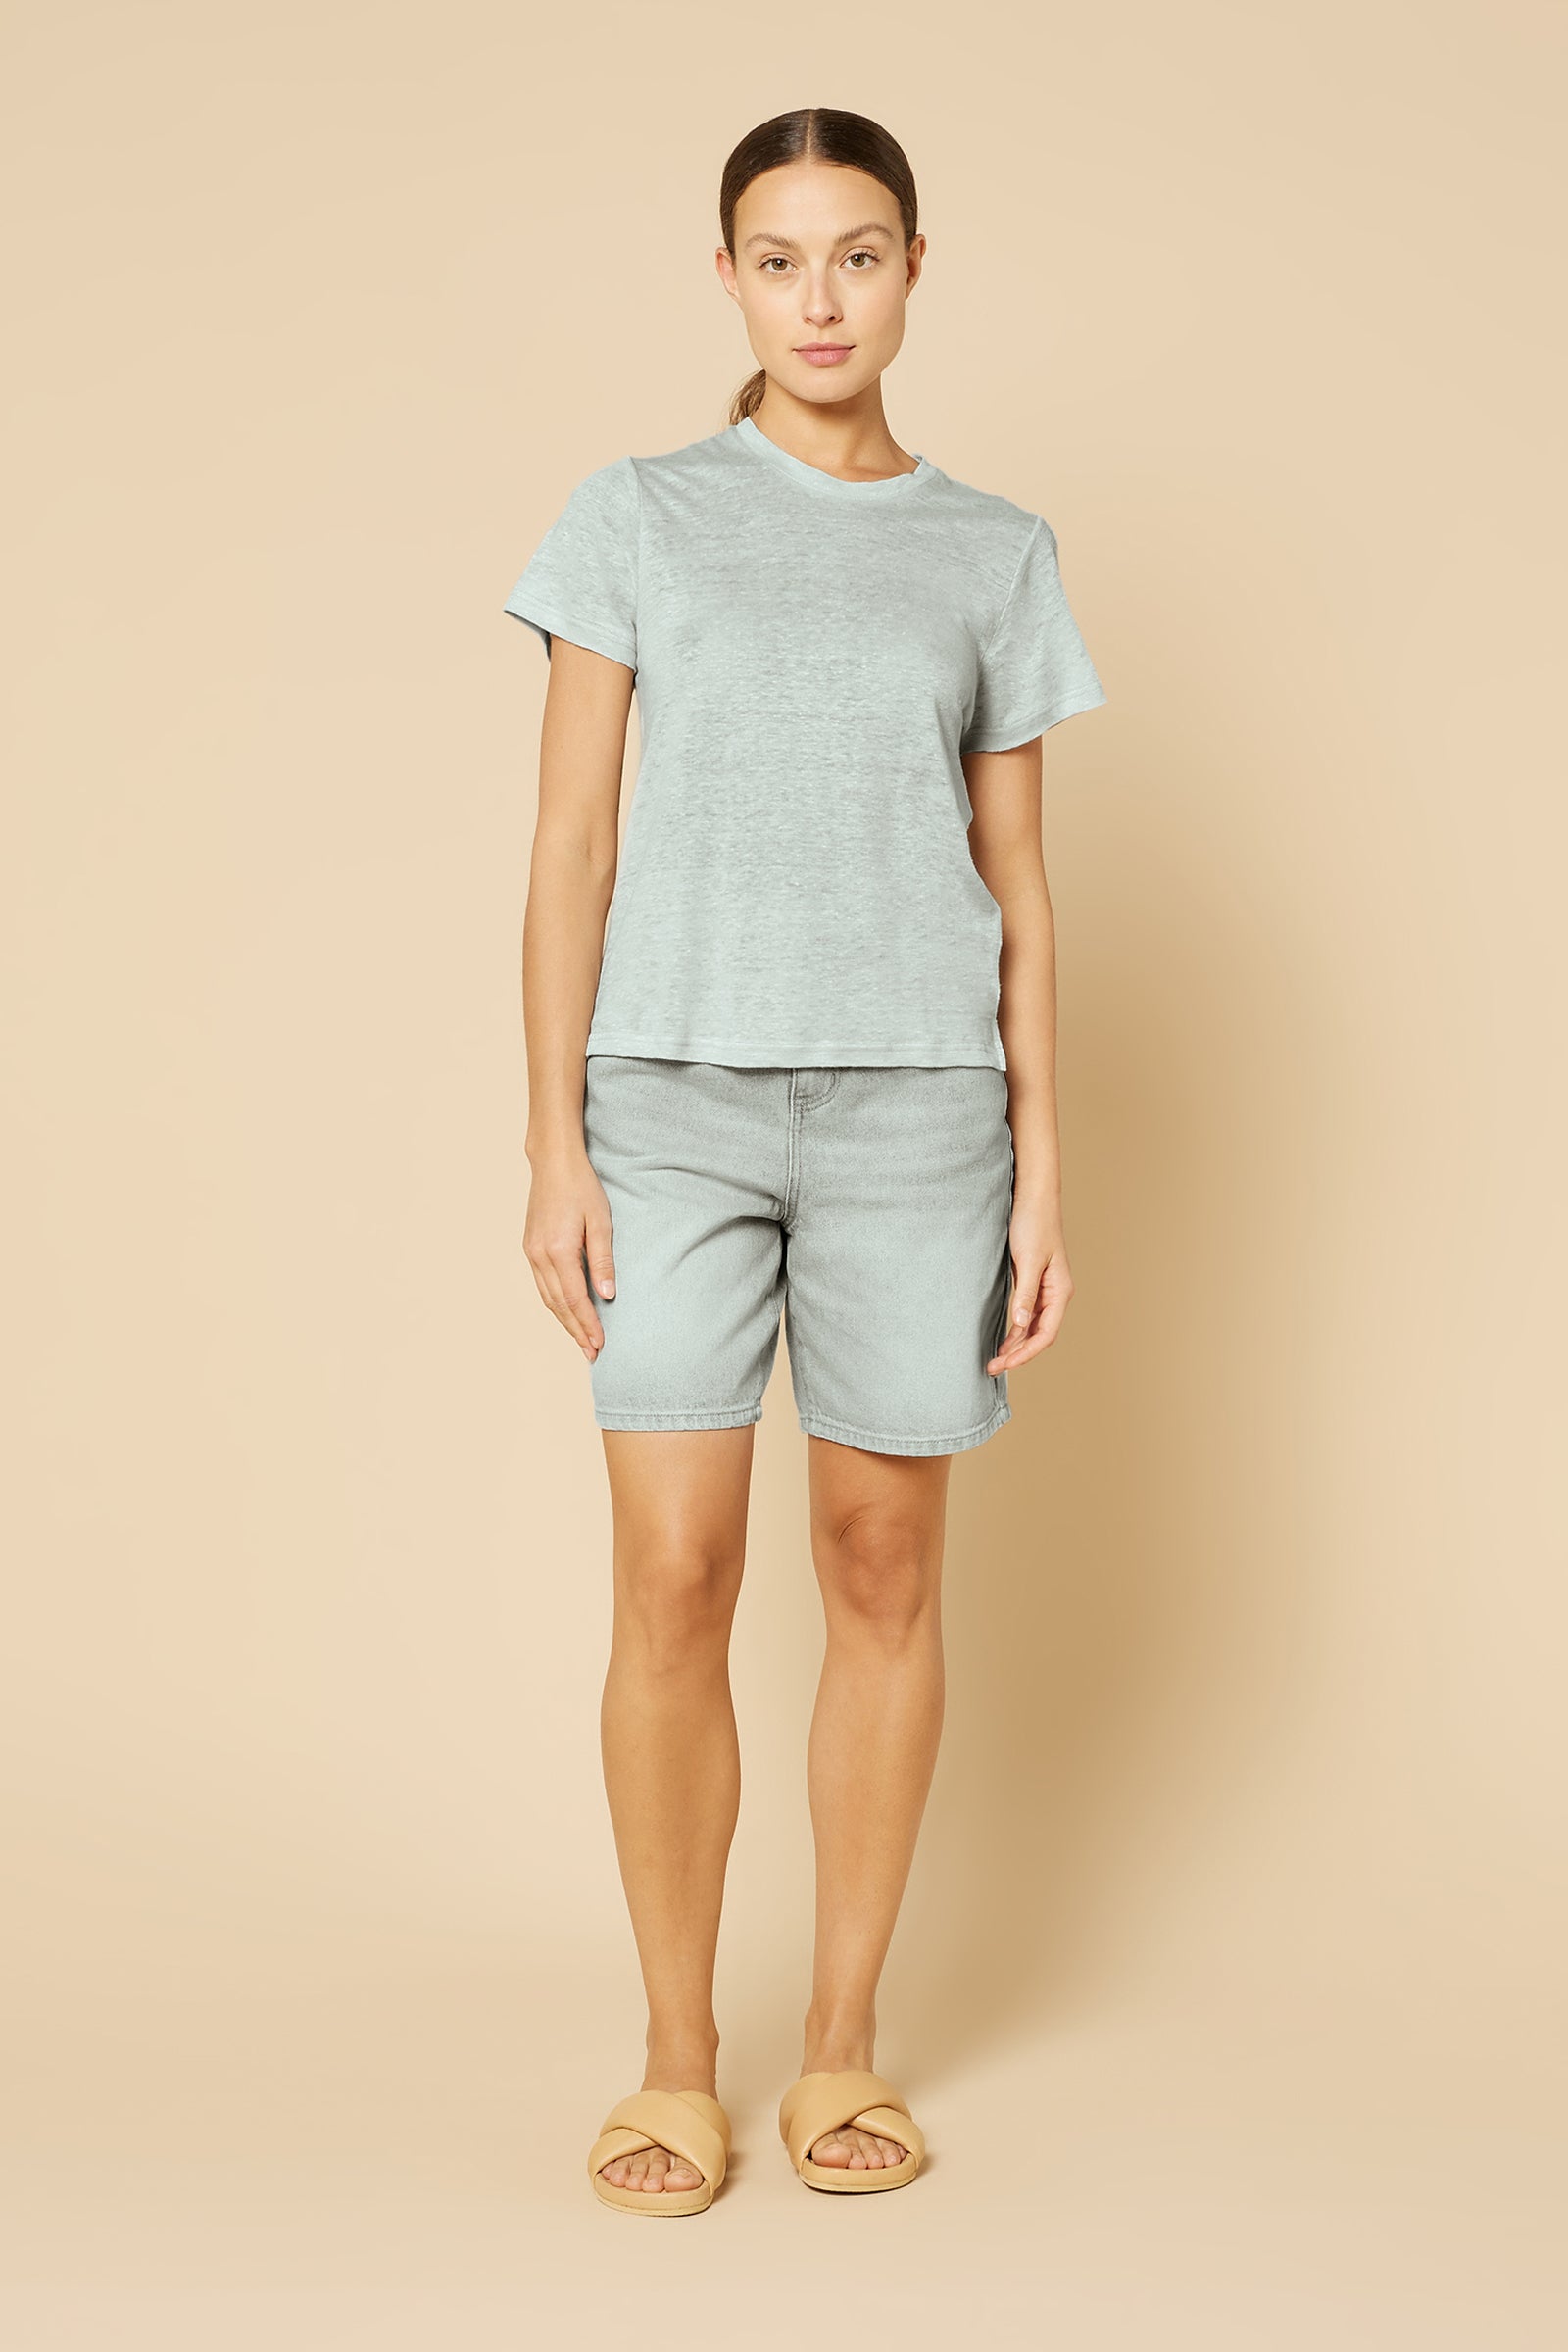 Nude Lucy Clara Linen Tee in a Ice White Colour